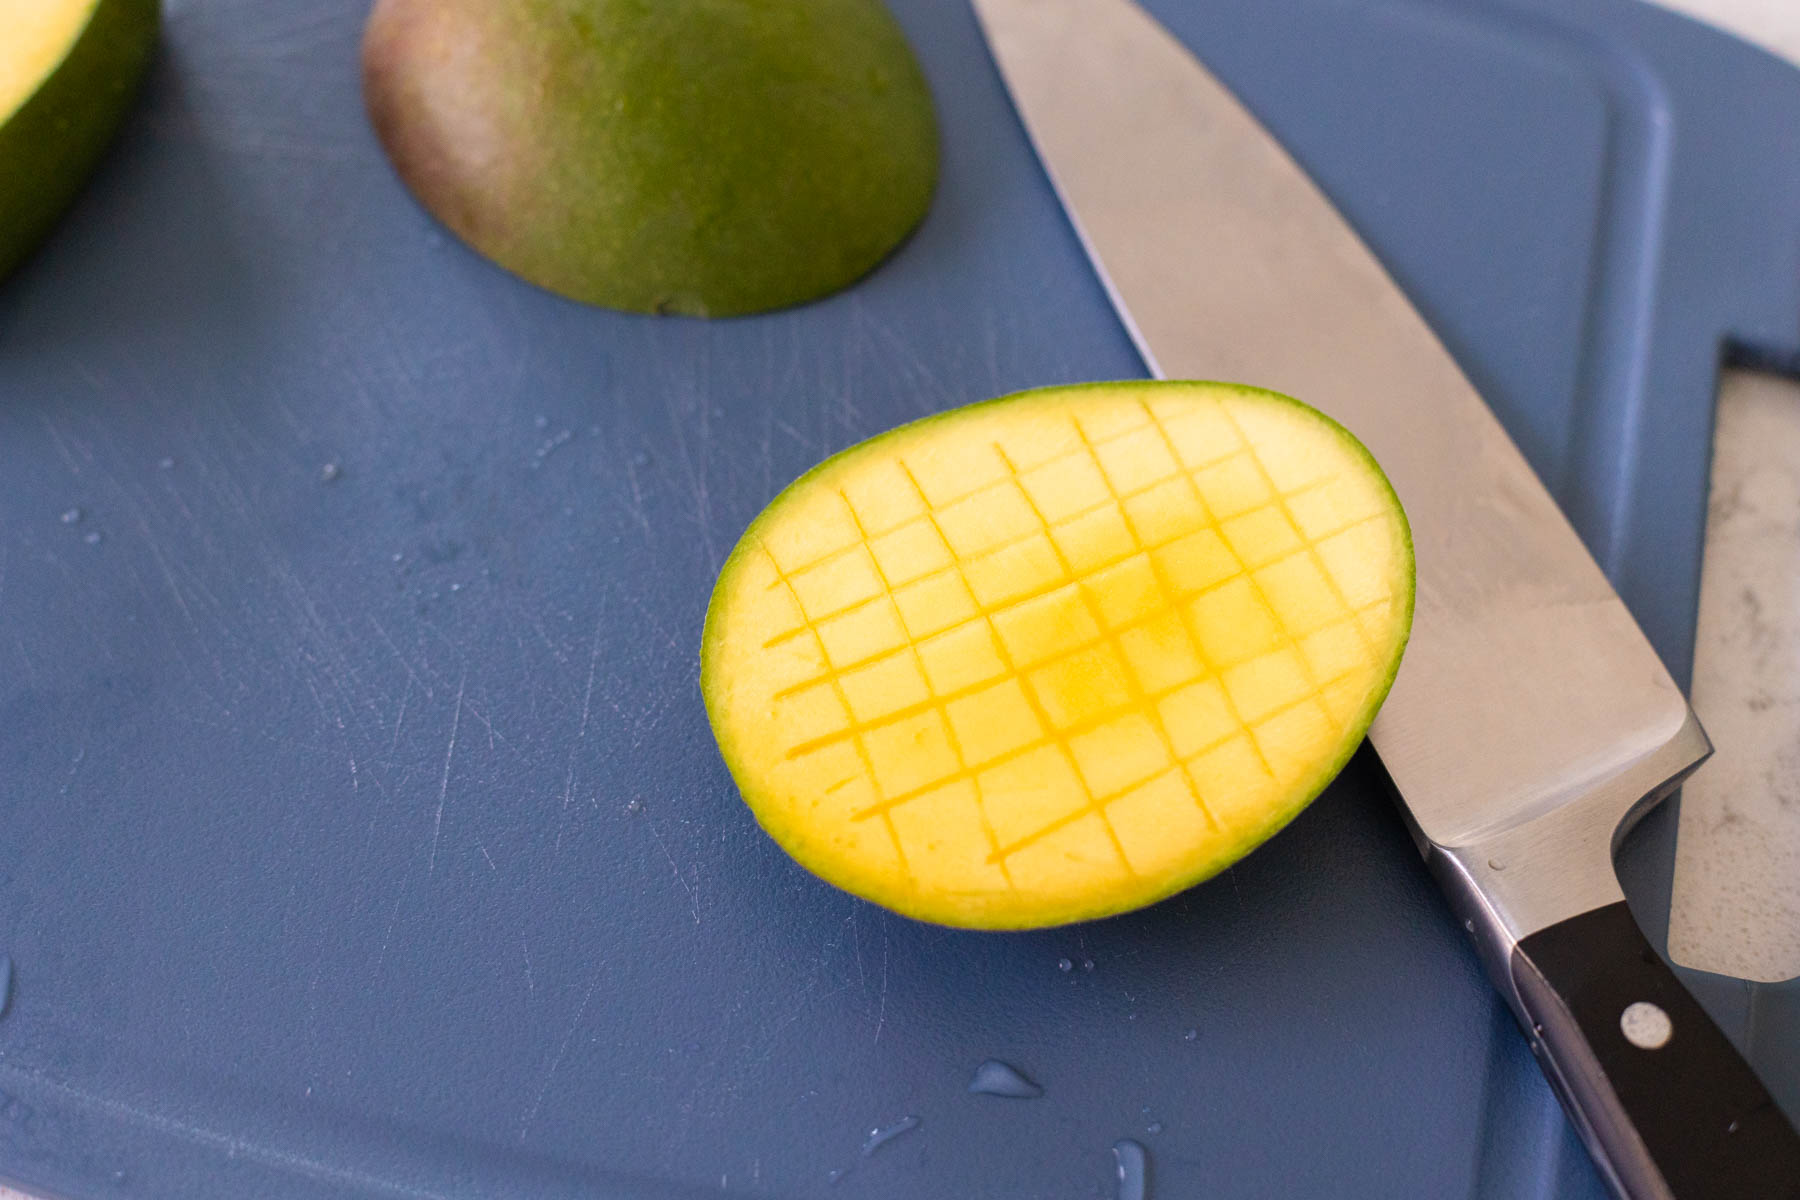 The fresh mango has been scored into a grid with the knife.